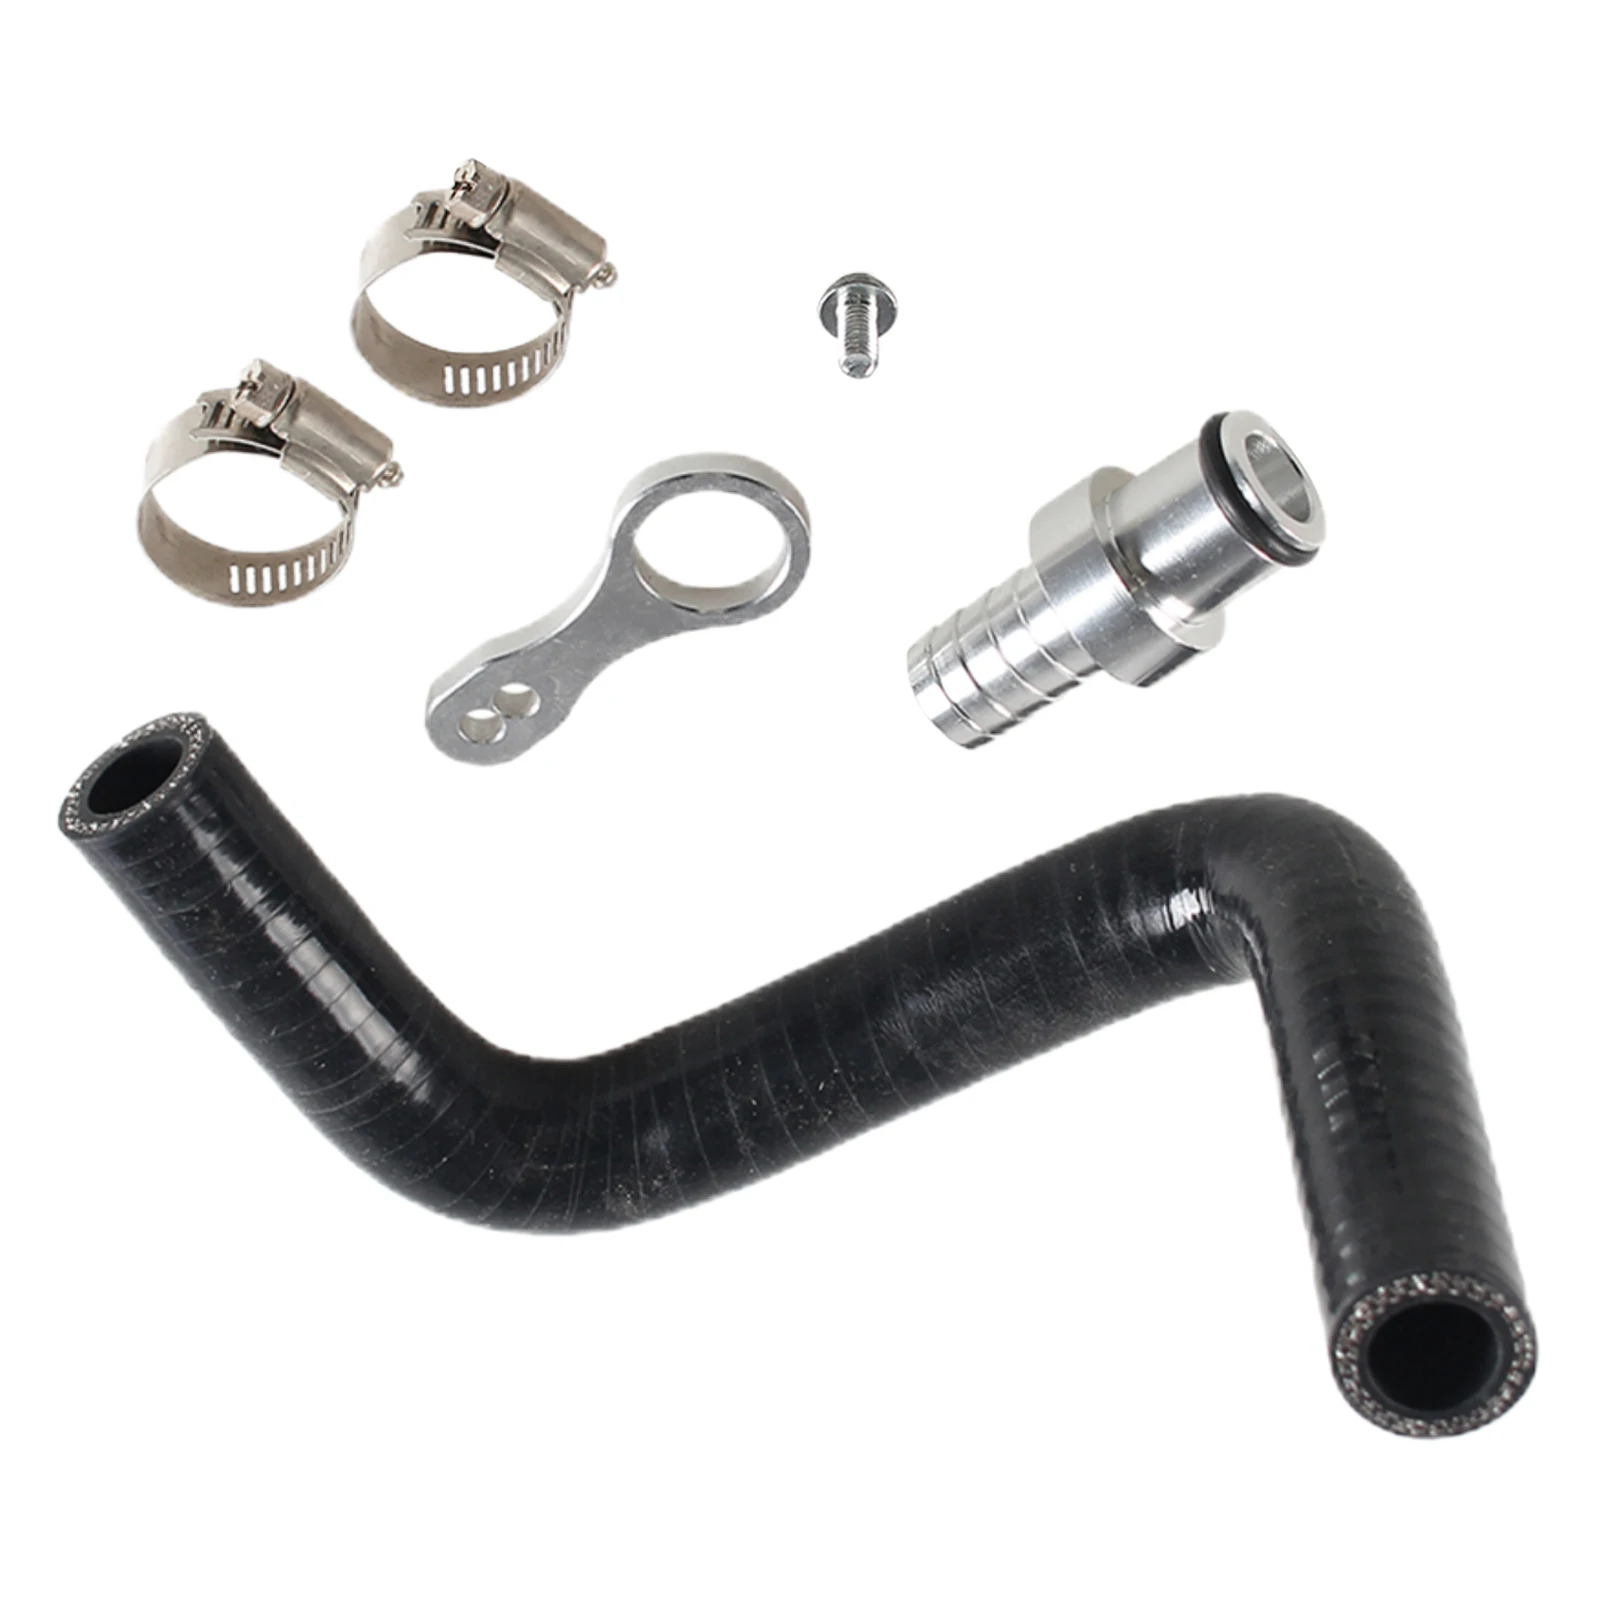 6Pieces Coolant Radiator Hose Barb Adapter Kit Accessories Vehicle Parts Bypass Adapter Kit for RAM 4500/5500 09-2019